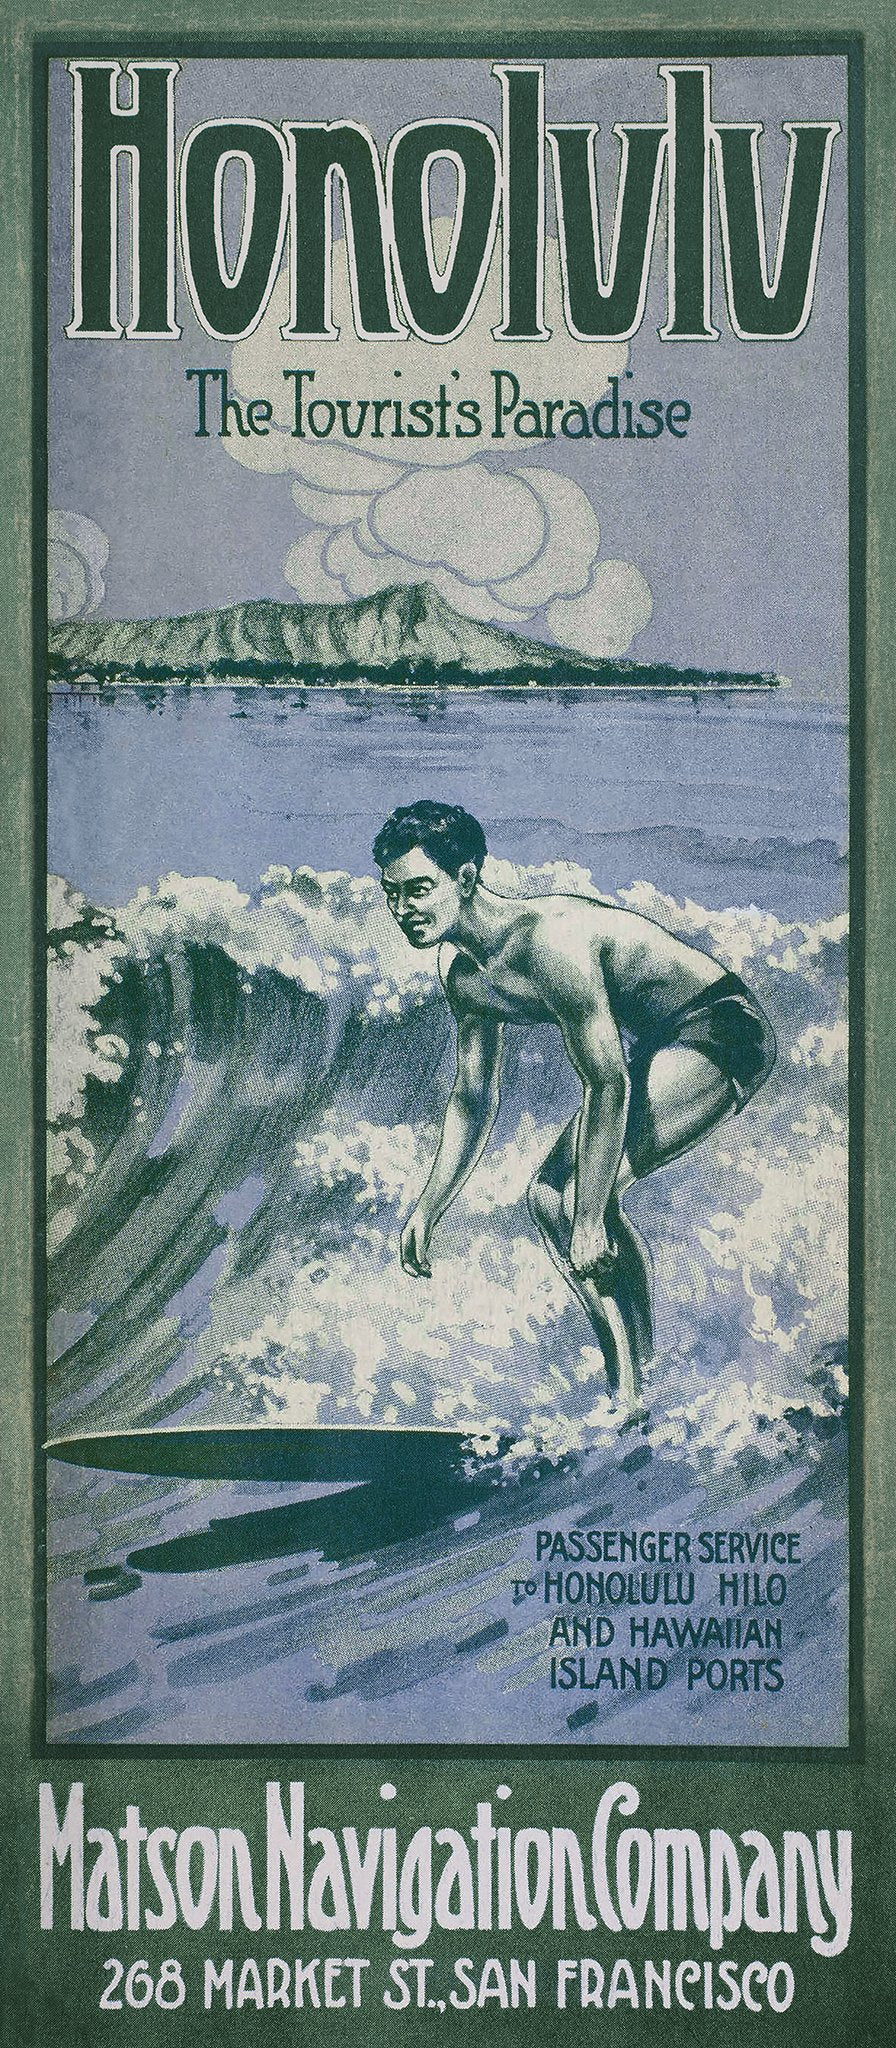 Vintage Hawaii travel brochure cover illustration in blue and white shades, standing halfway upright on a surfboard riding a wave. “Honolulu the Tourist’s Paradise” written at the top, “Matson Navigation Company 268 Market St., San Francisco” written at the bottom.